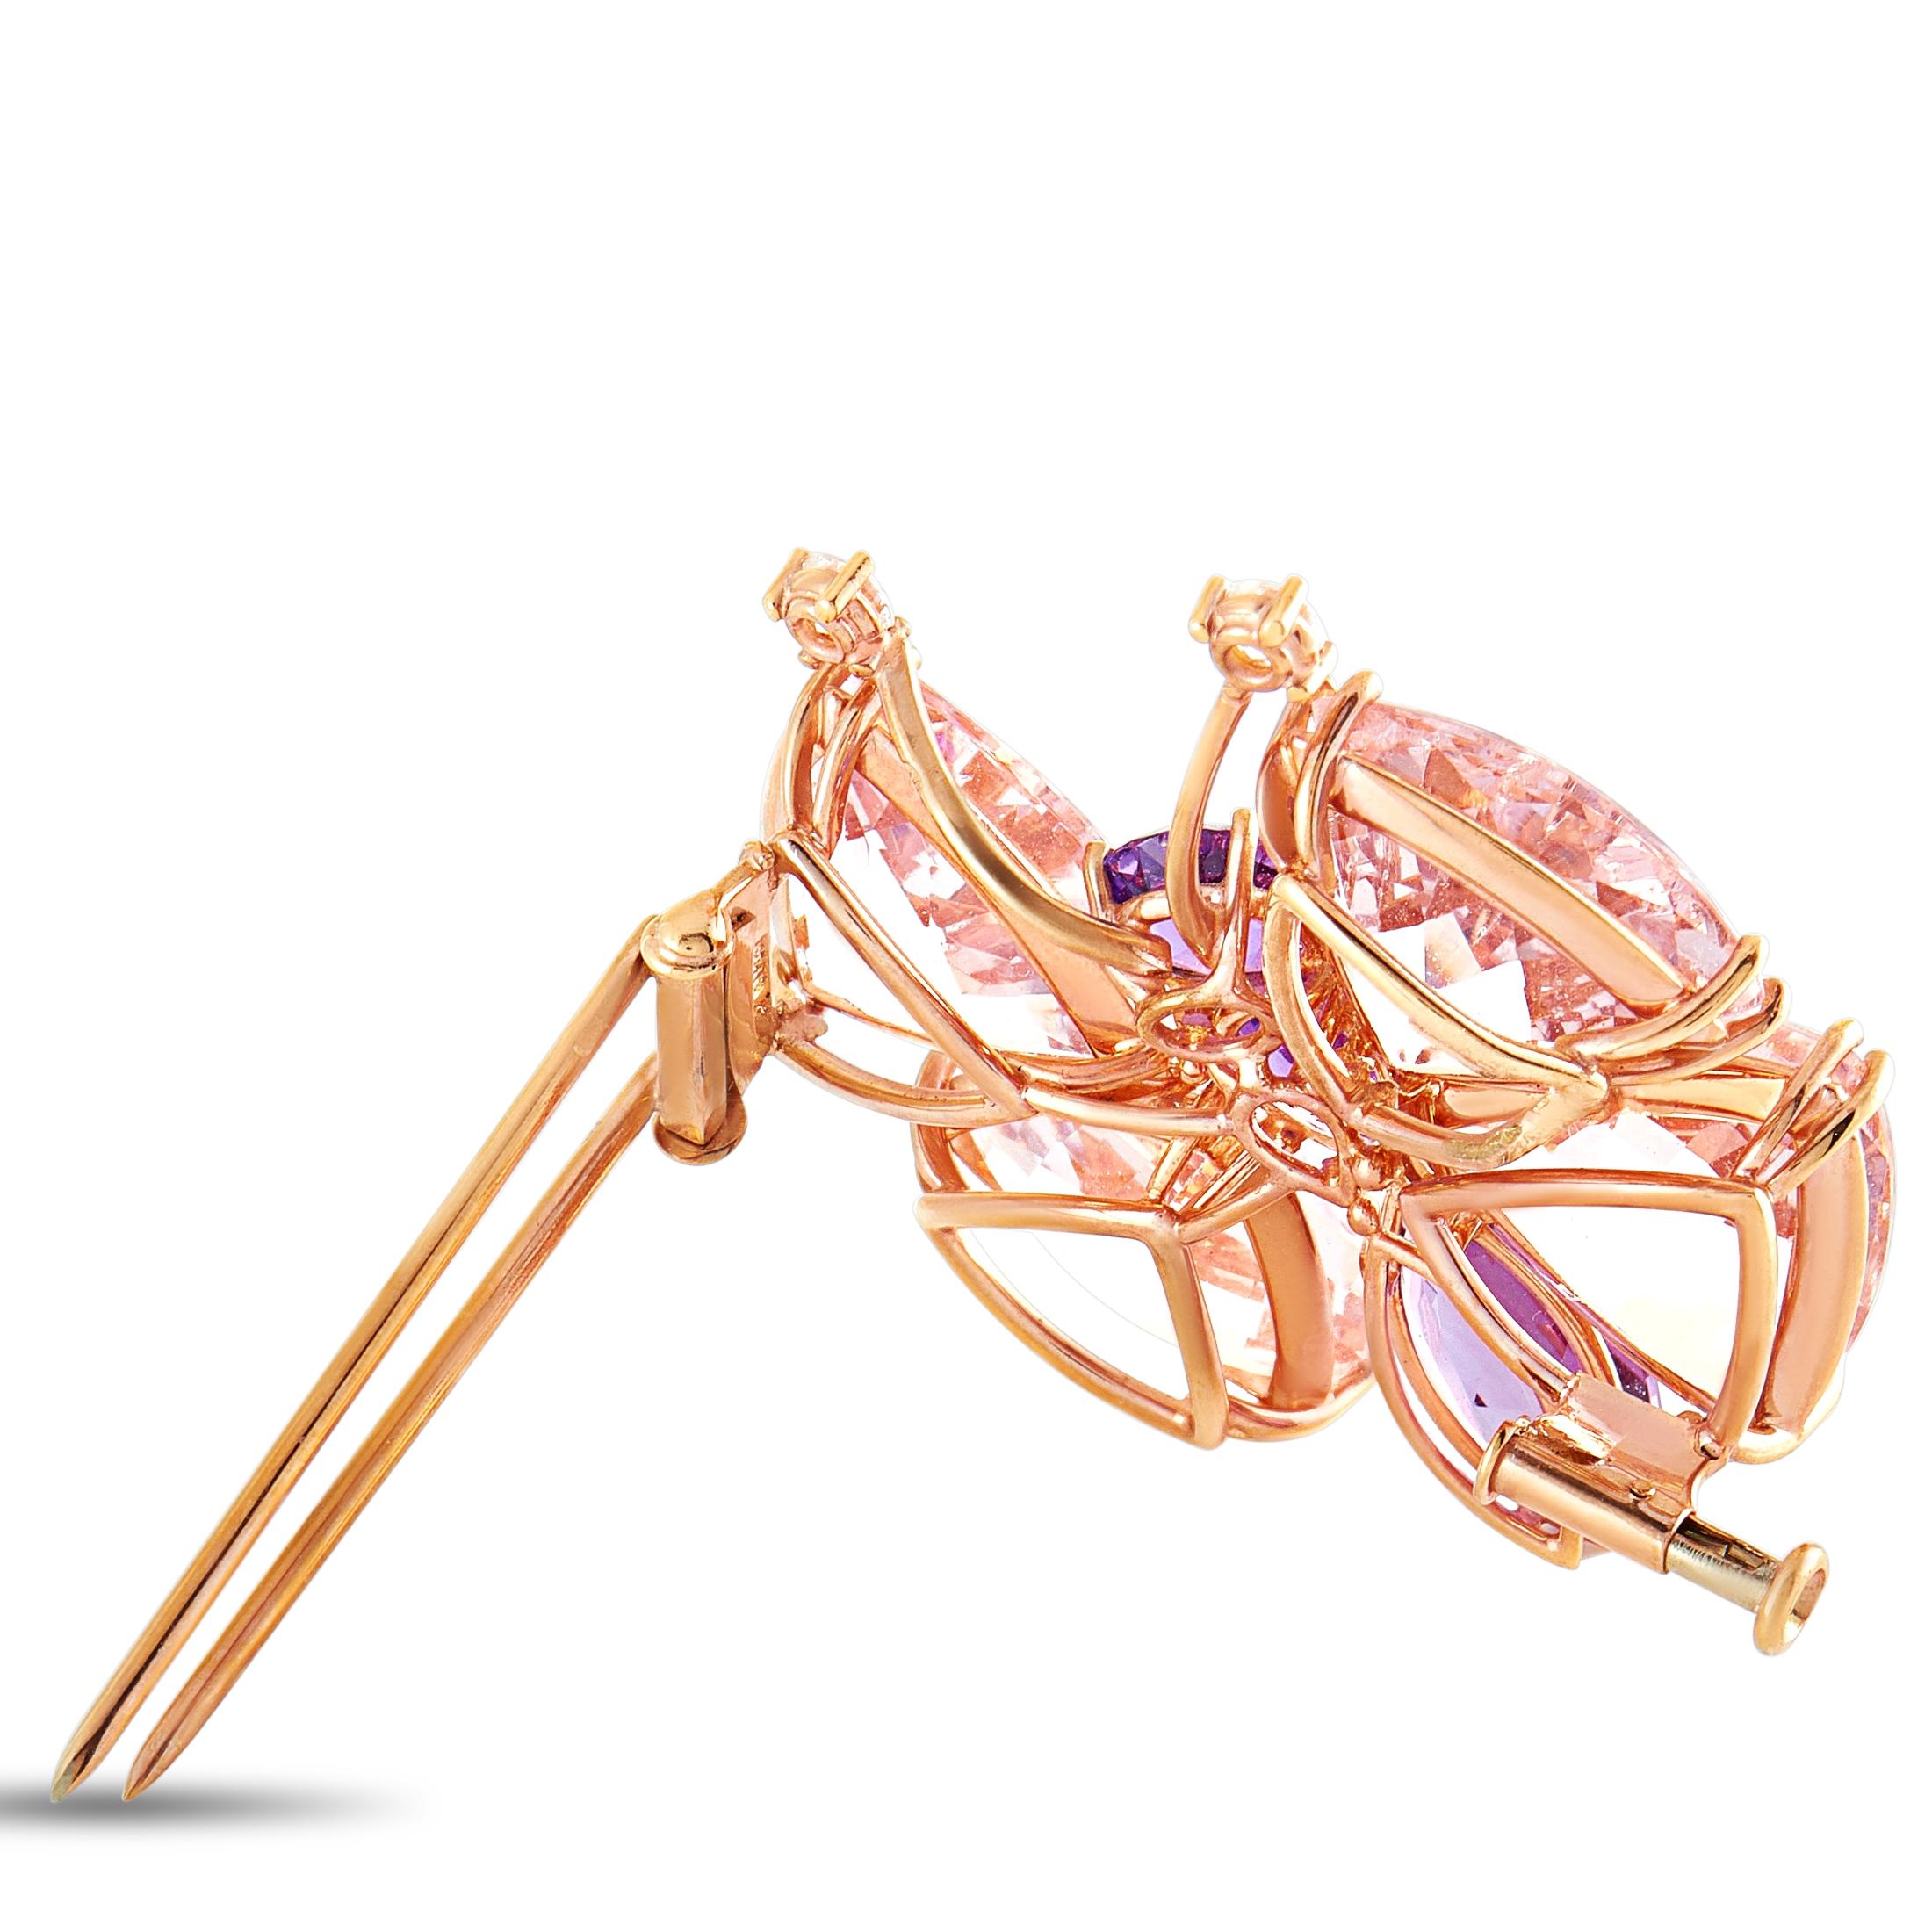 This Chopard butterfly brooch is crafted from 18K rose gold and weighs 5.7 grams, measuring 1.25” in length and 1.25” in width. The brooch is embellished with diamond, amethyst and morganite stones. The diamonds amount to 0.17 carats and the